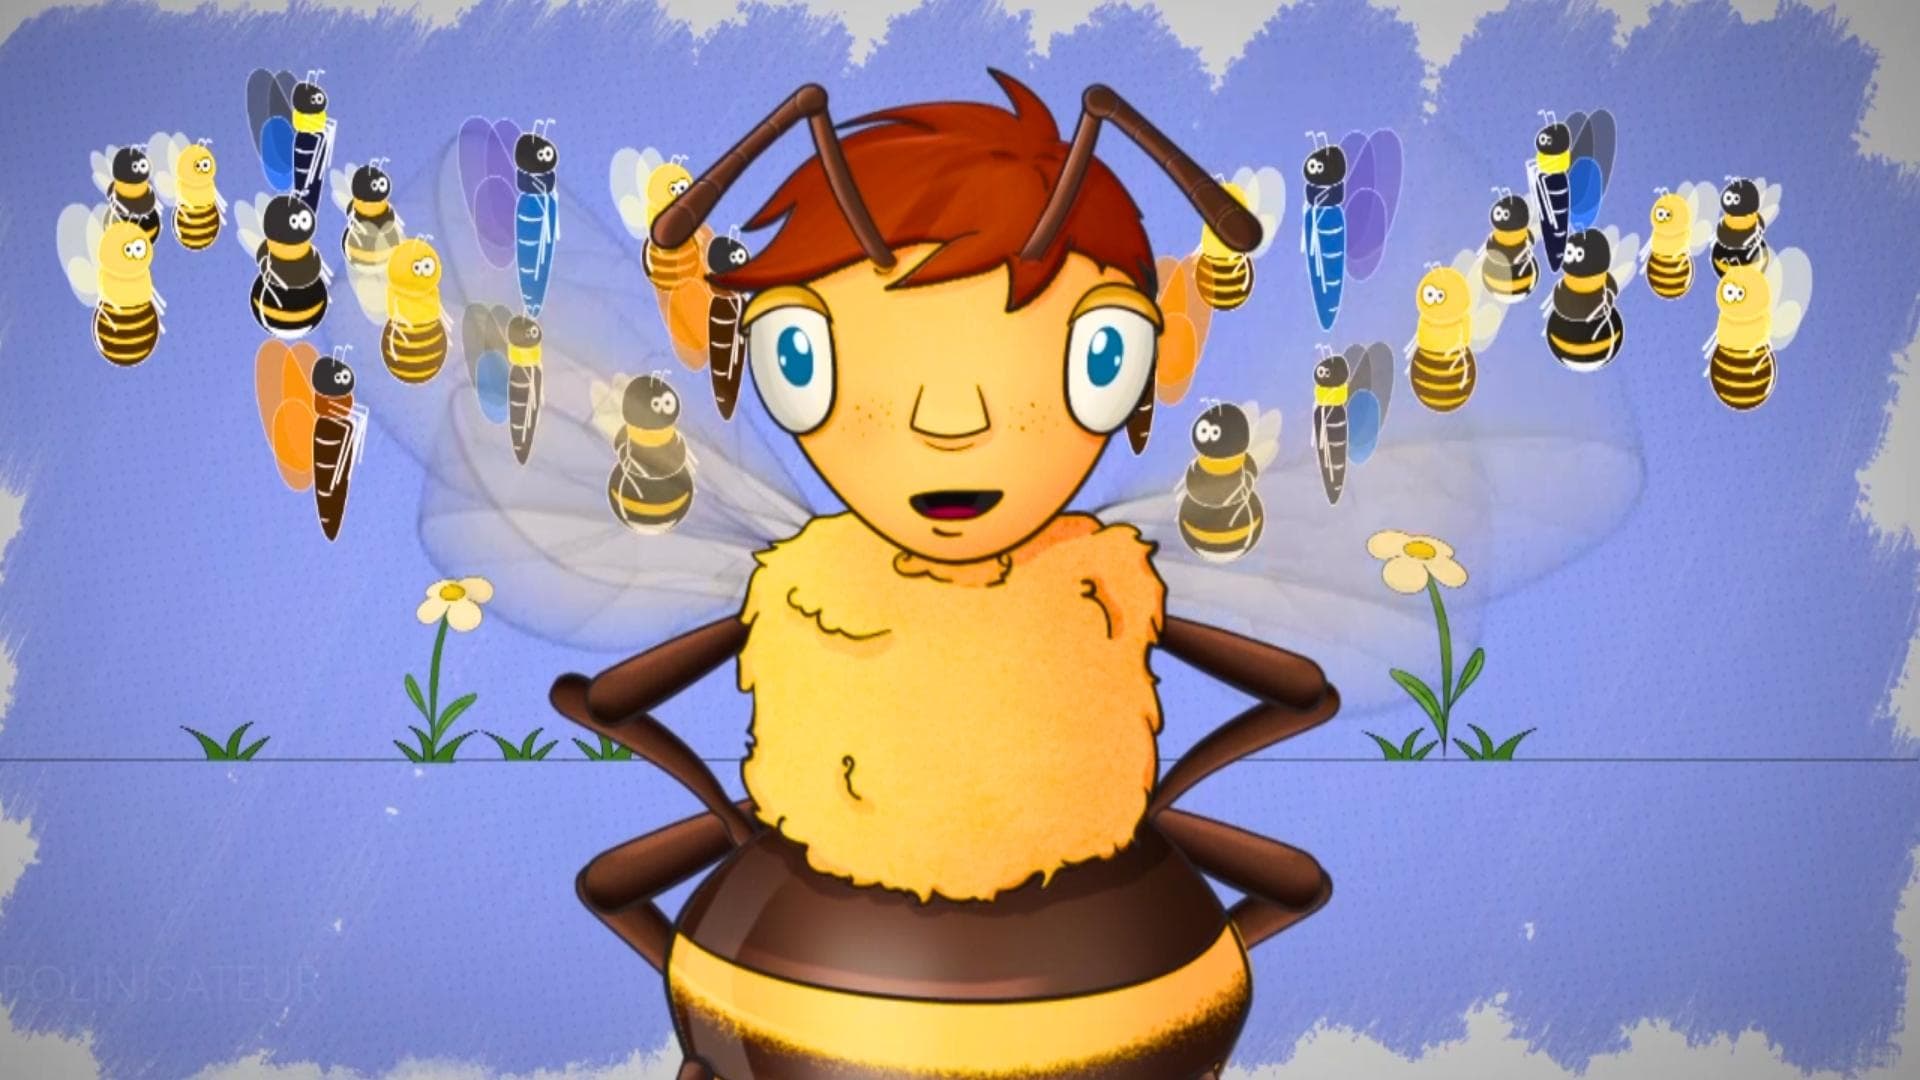 How a Voice-Over Actress Brings an Animated Bee to Life